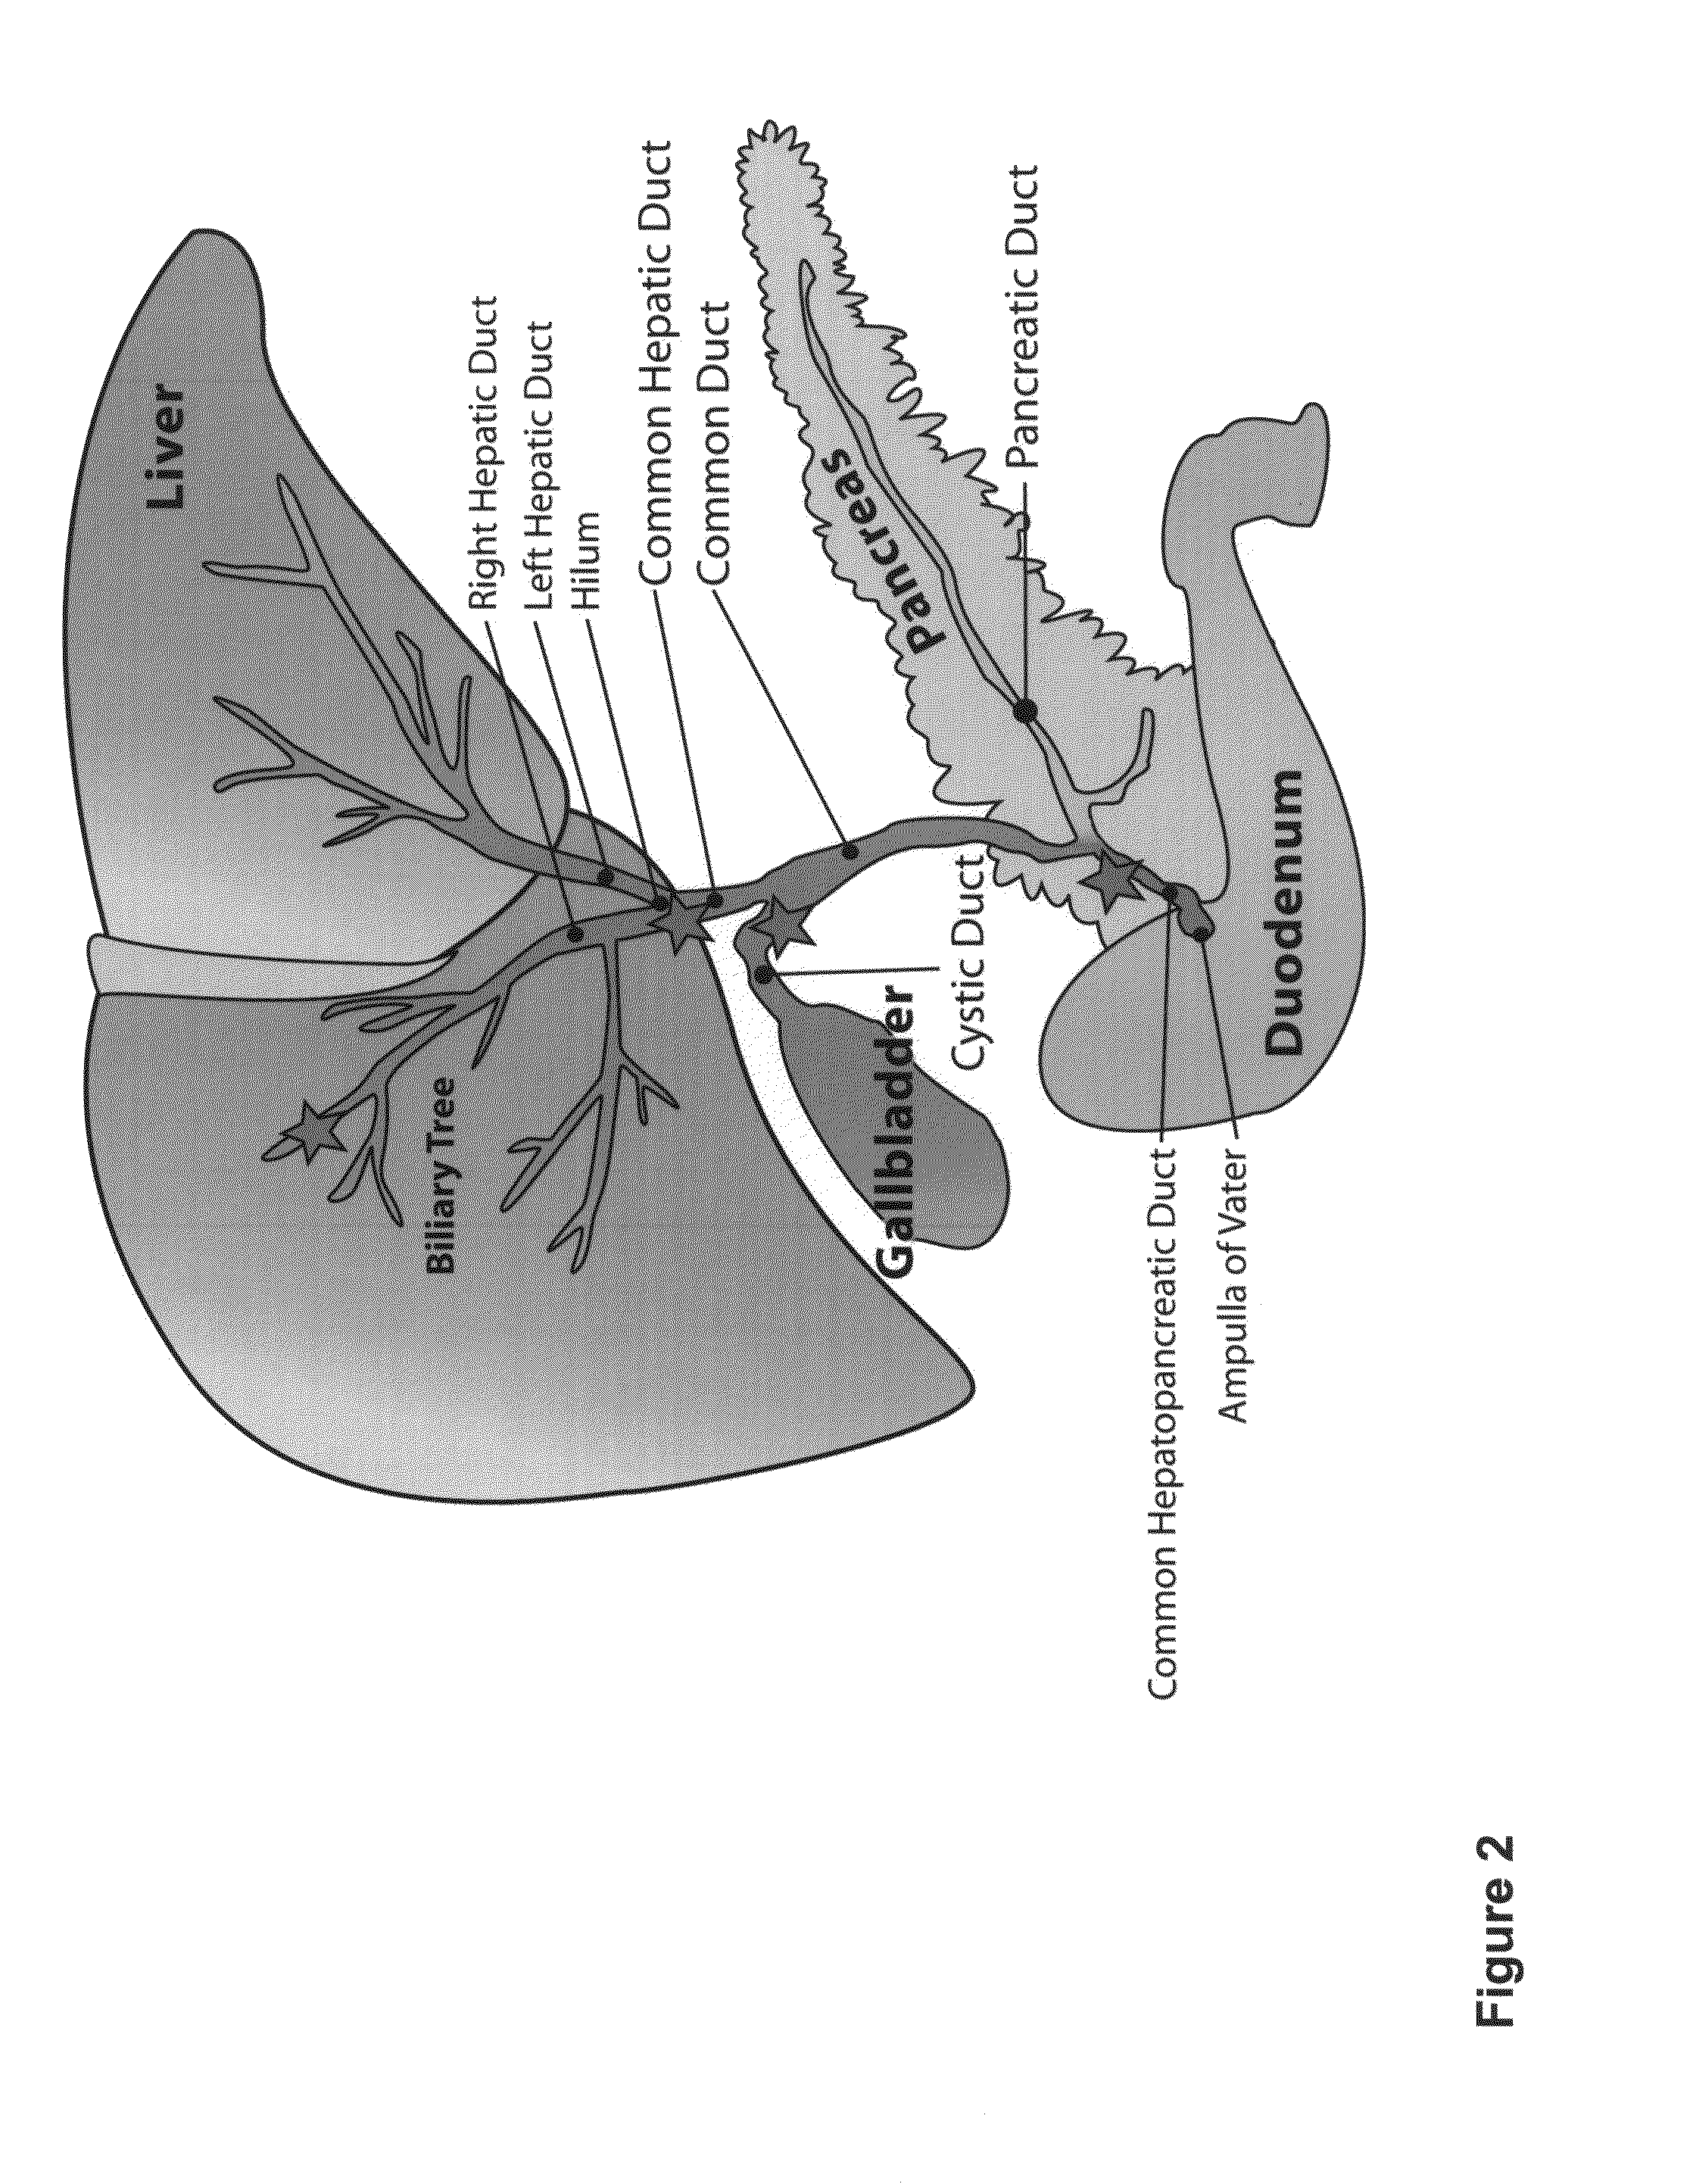 Multipotent stem cells from the extrahepatic biliary tree and methods of isolating same